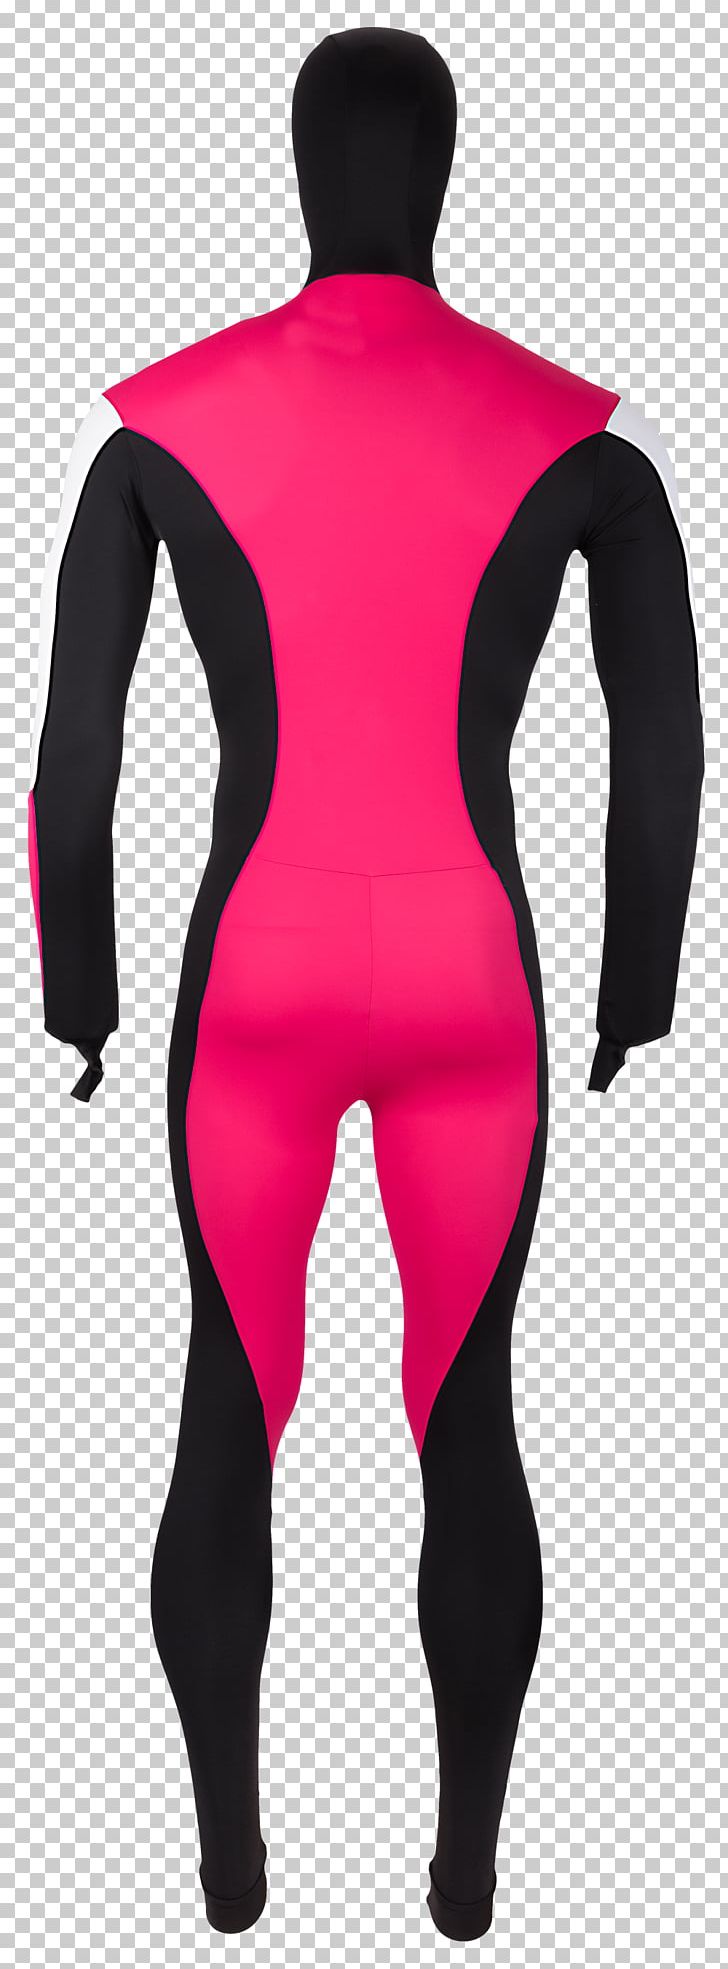 Wetsuit Spandex Shoulder Pink M Character PNG, Clipart, Character, Costume, Fictional Character, Joint, Magenta Free PNG Download